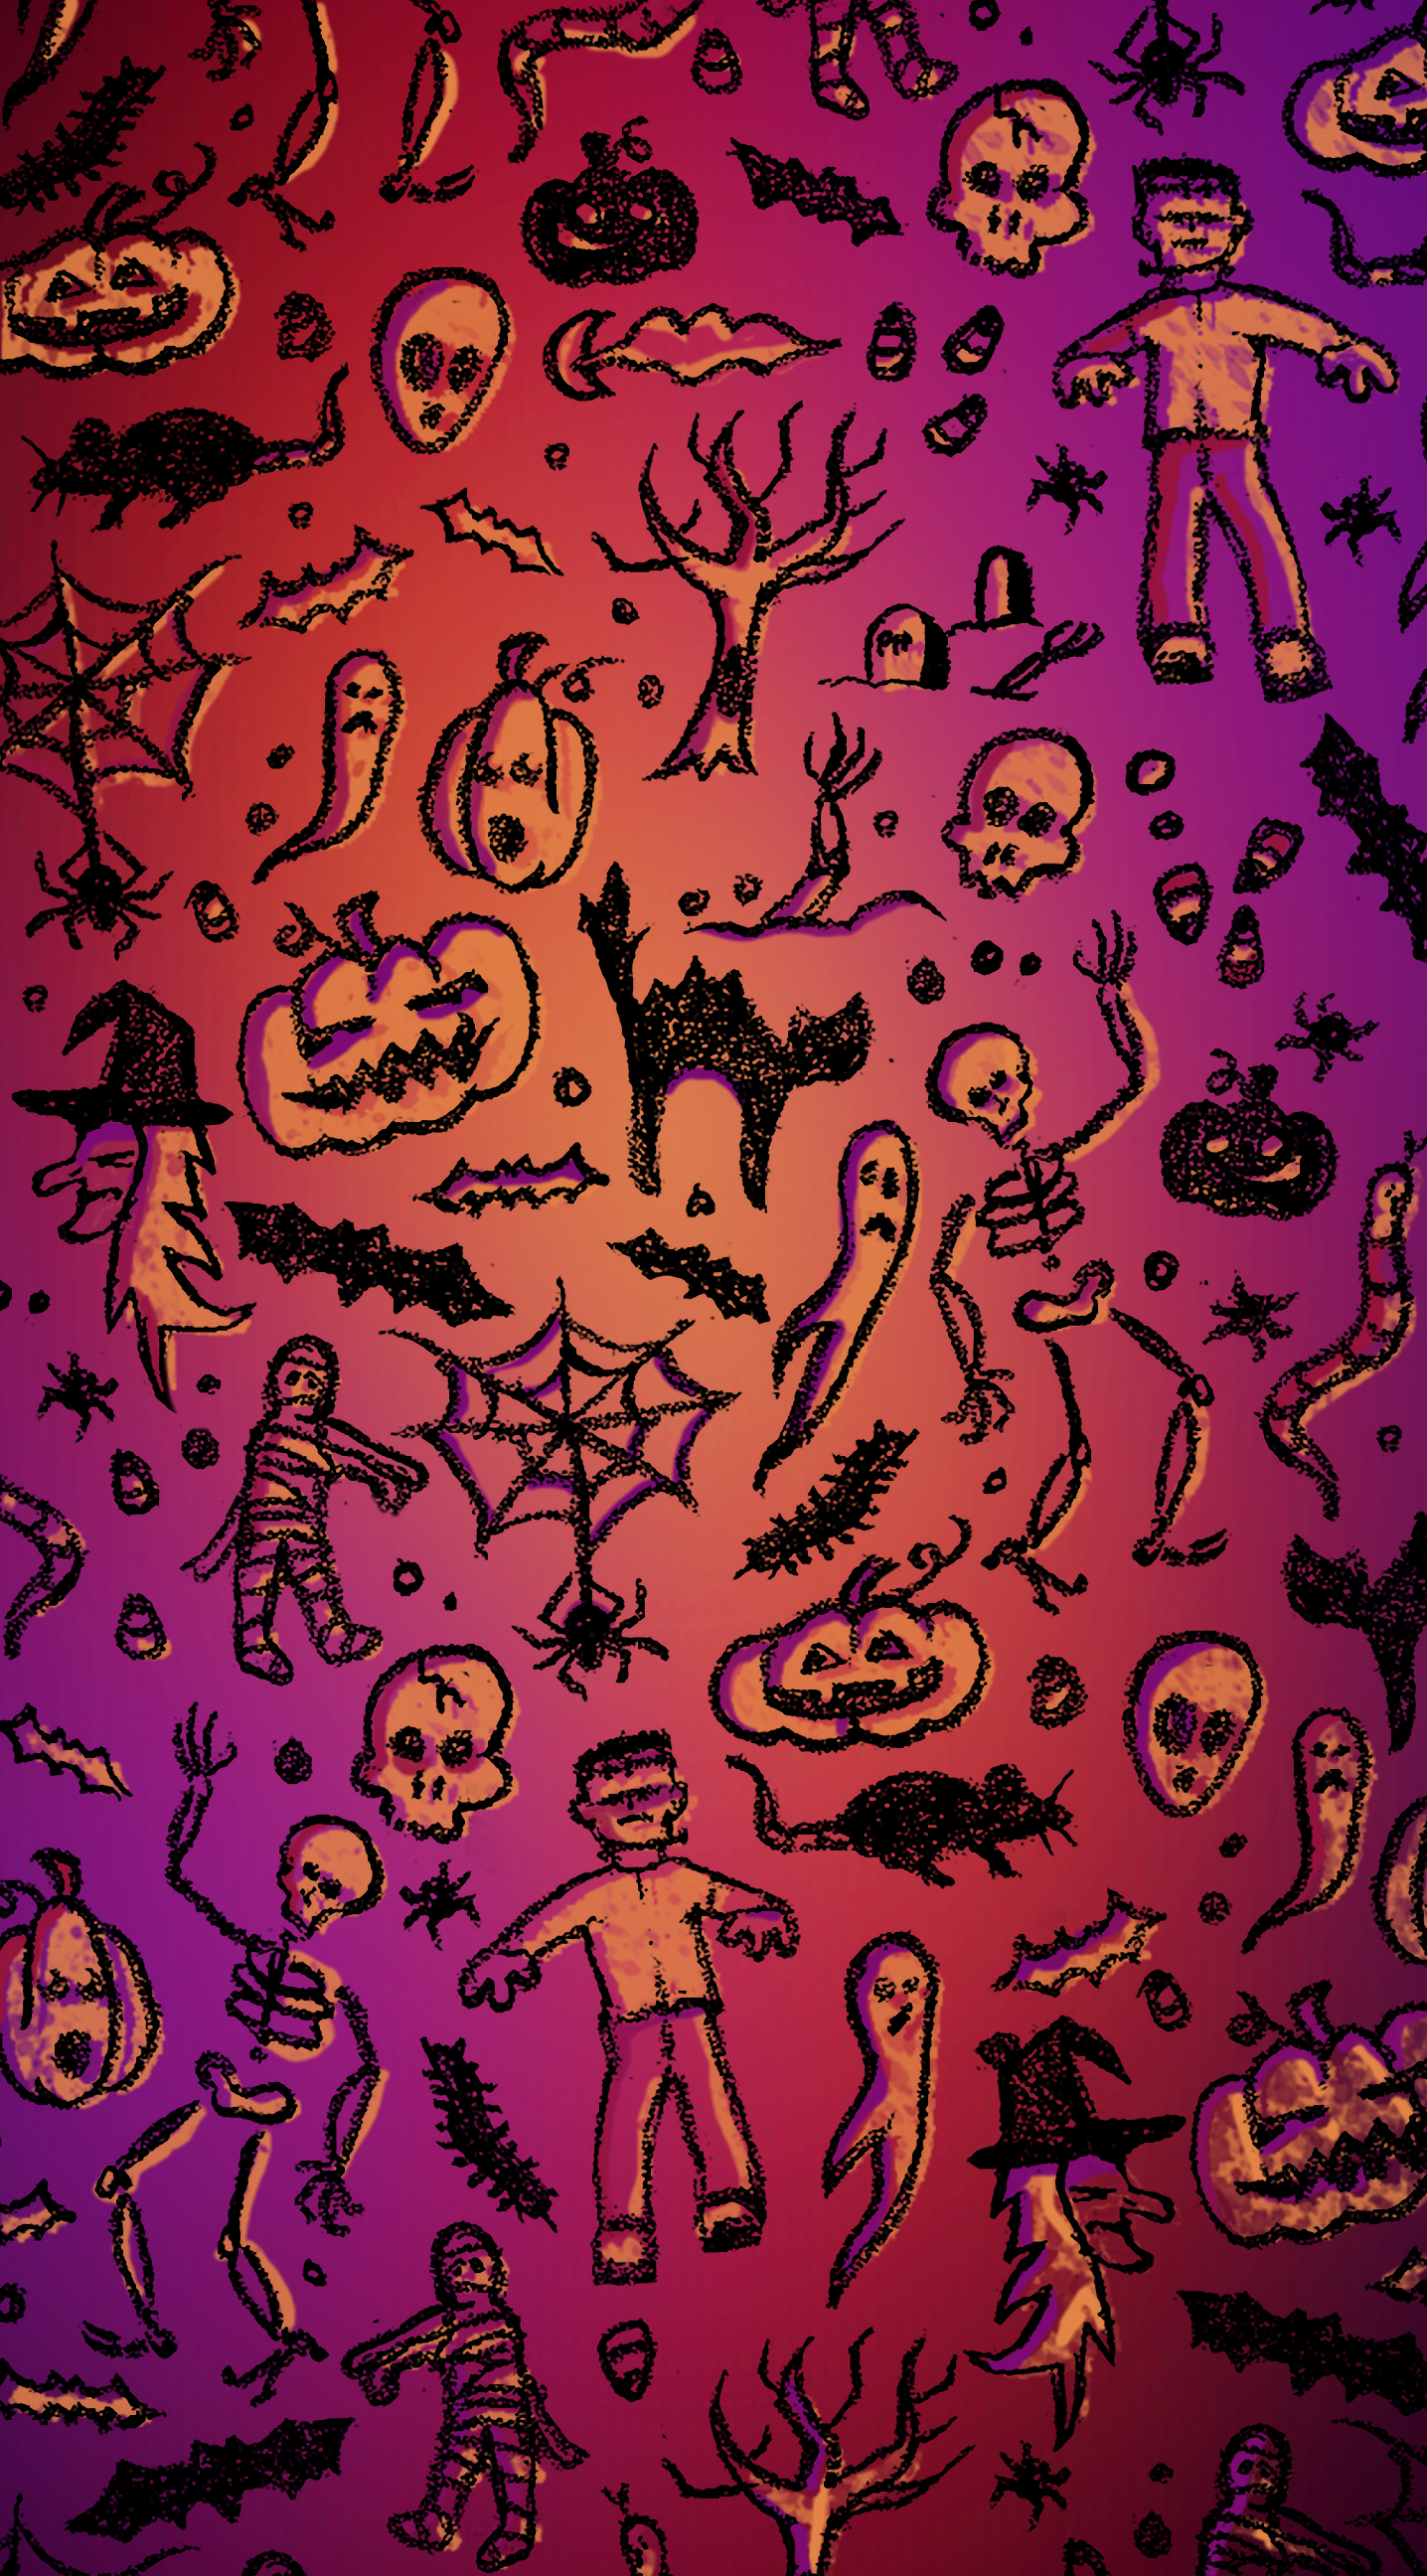 Purple Ghost Halloween Simple Background Wallpaper Image For Free Download   Pngtree